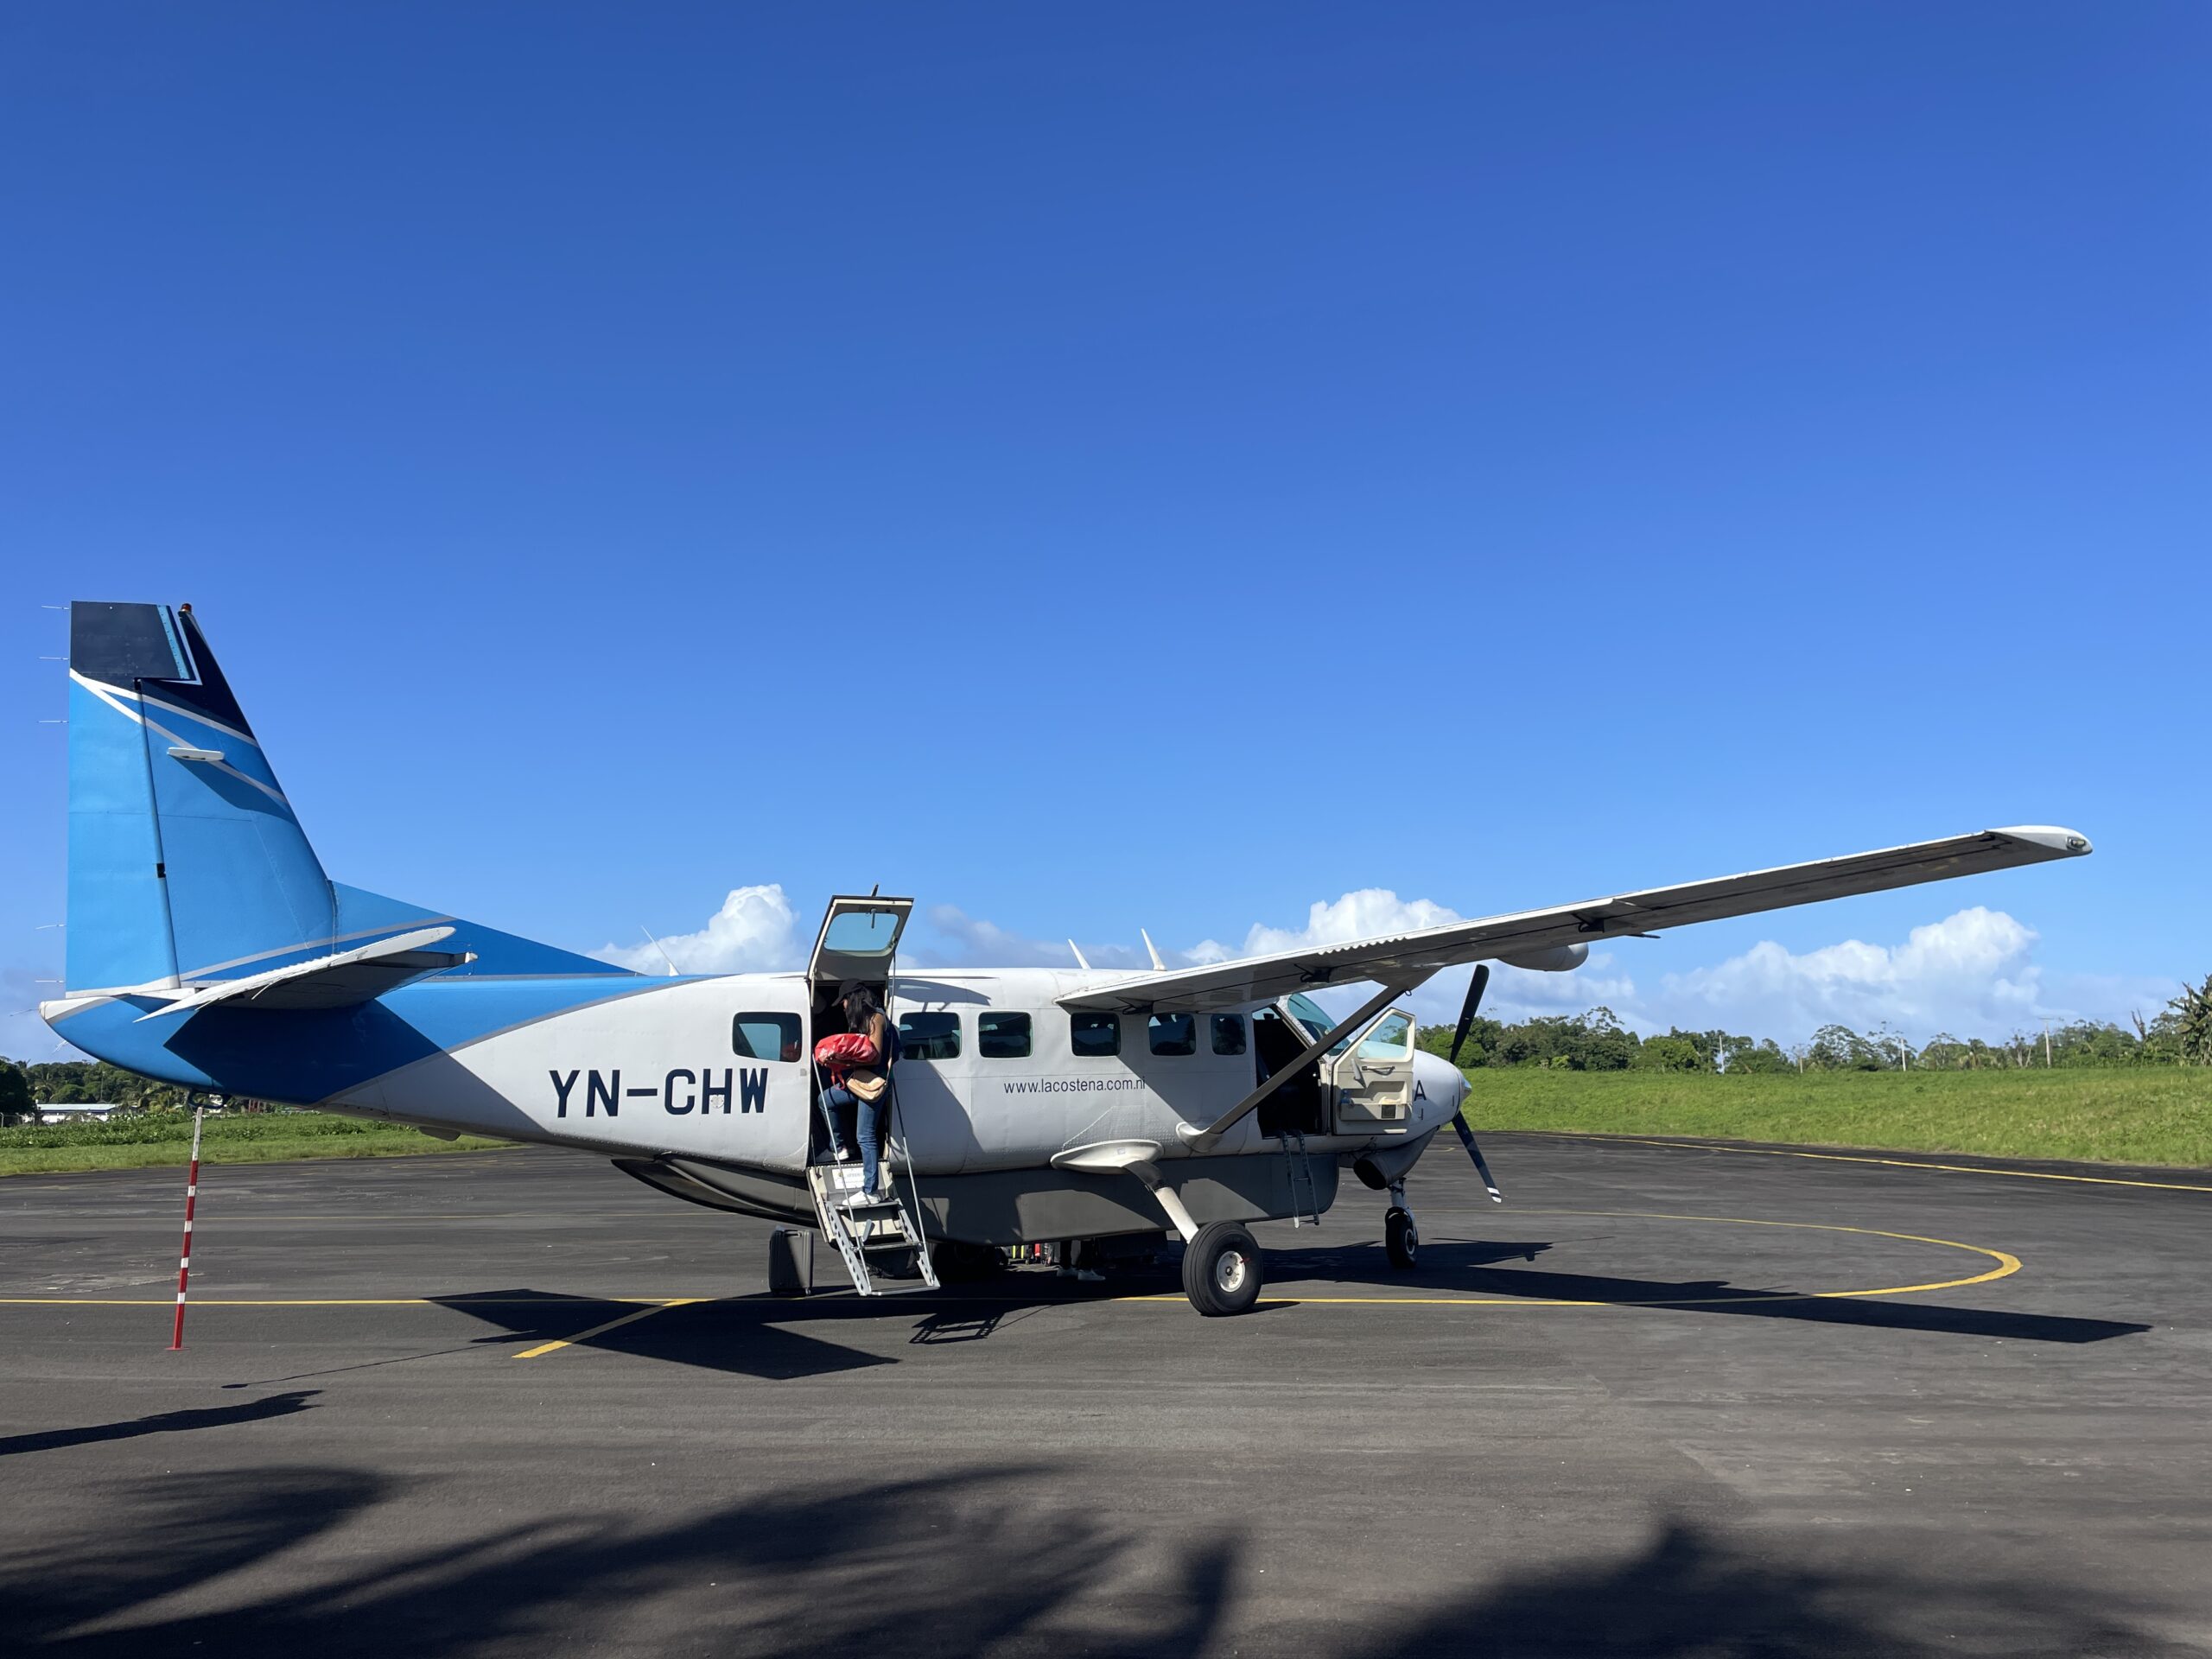 How to Get to the Corn Islands